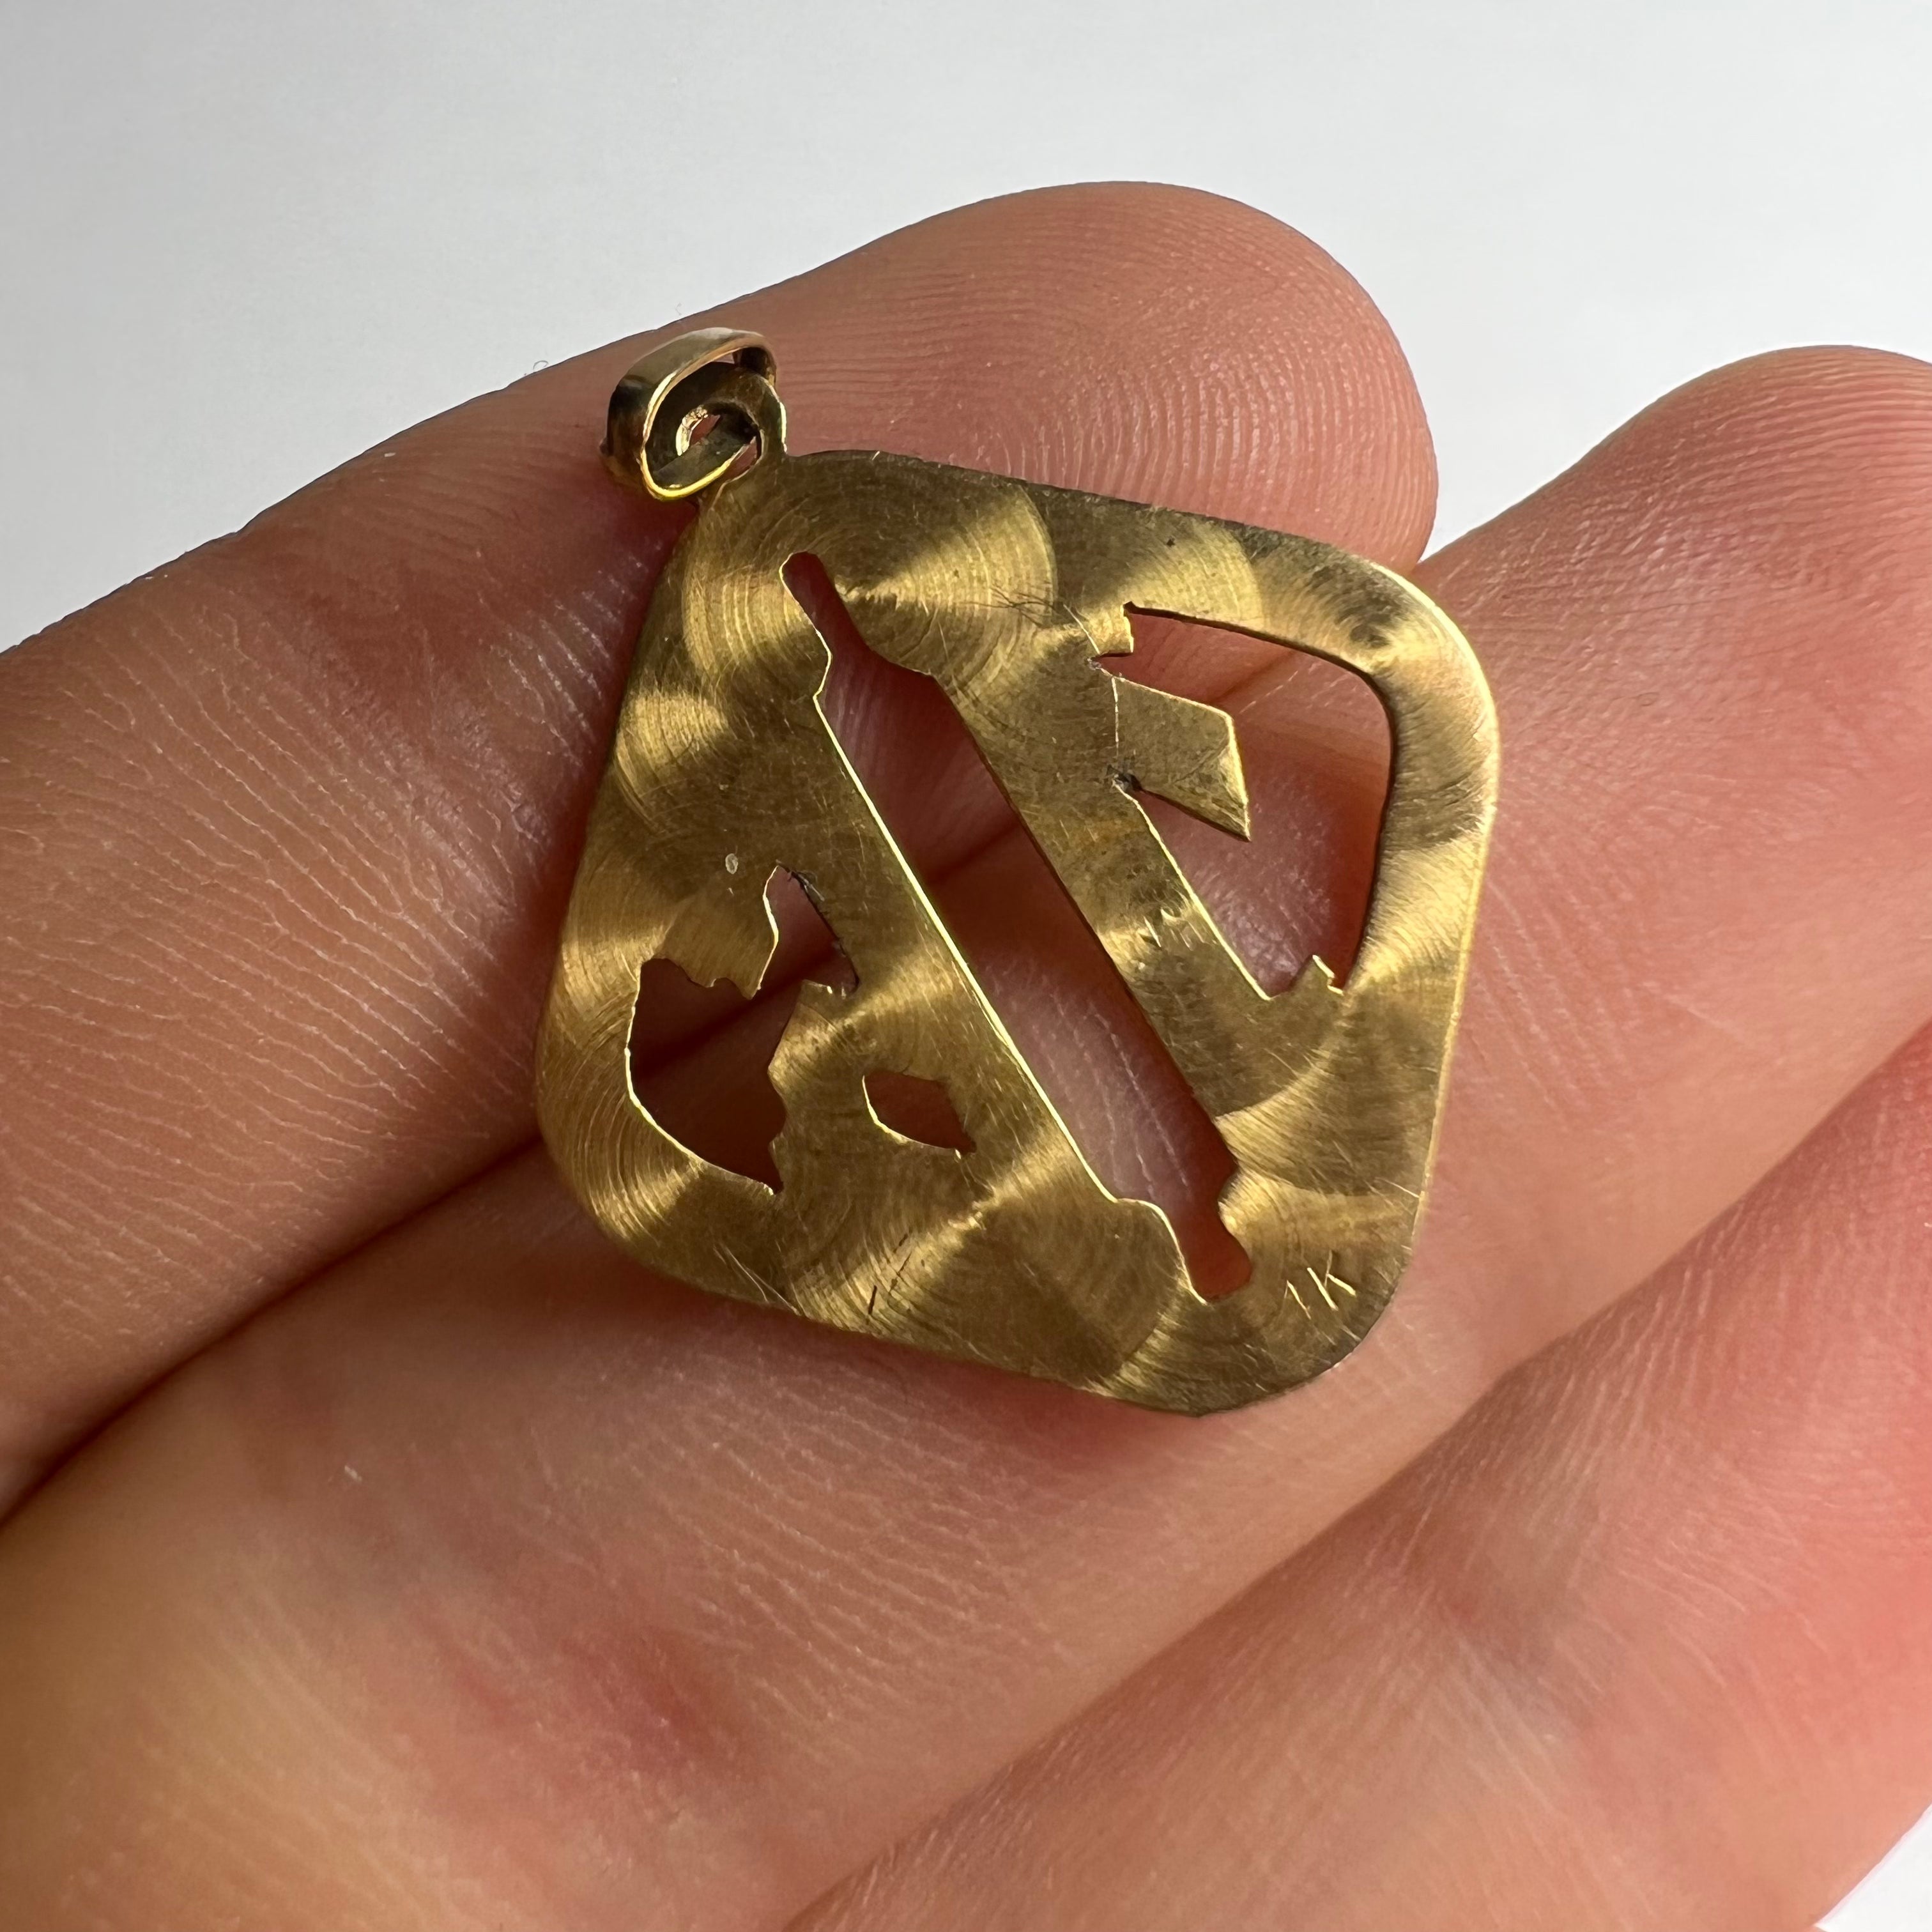 Number 16 Pendant 14K Yellow Gold